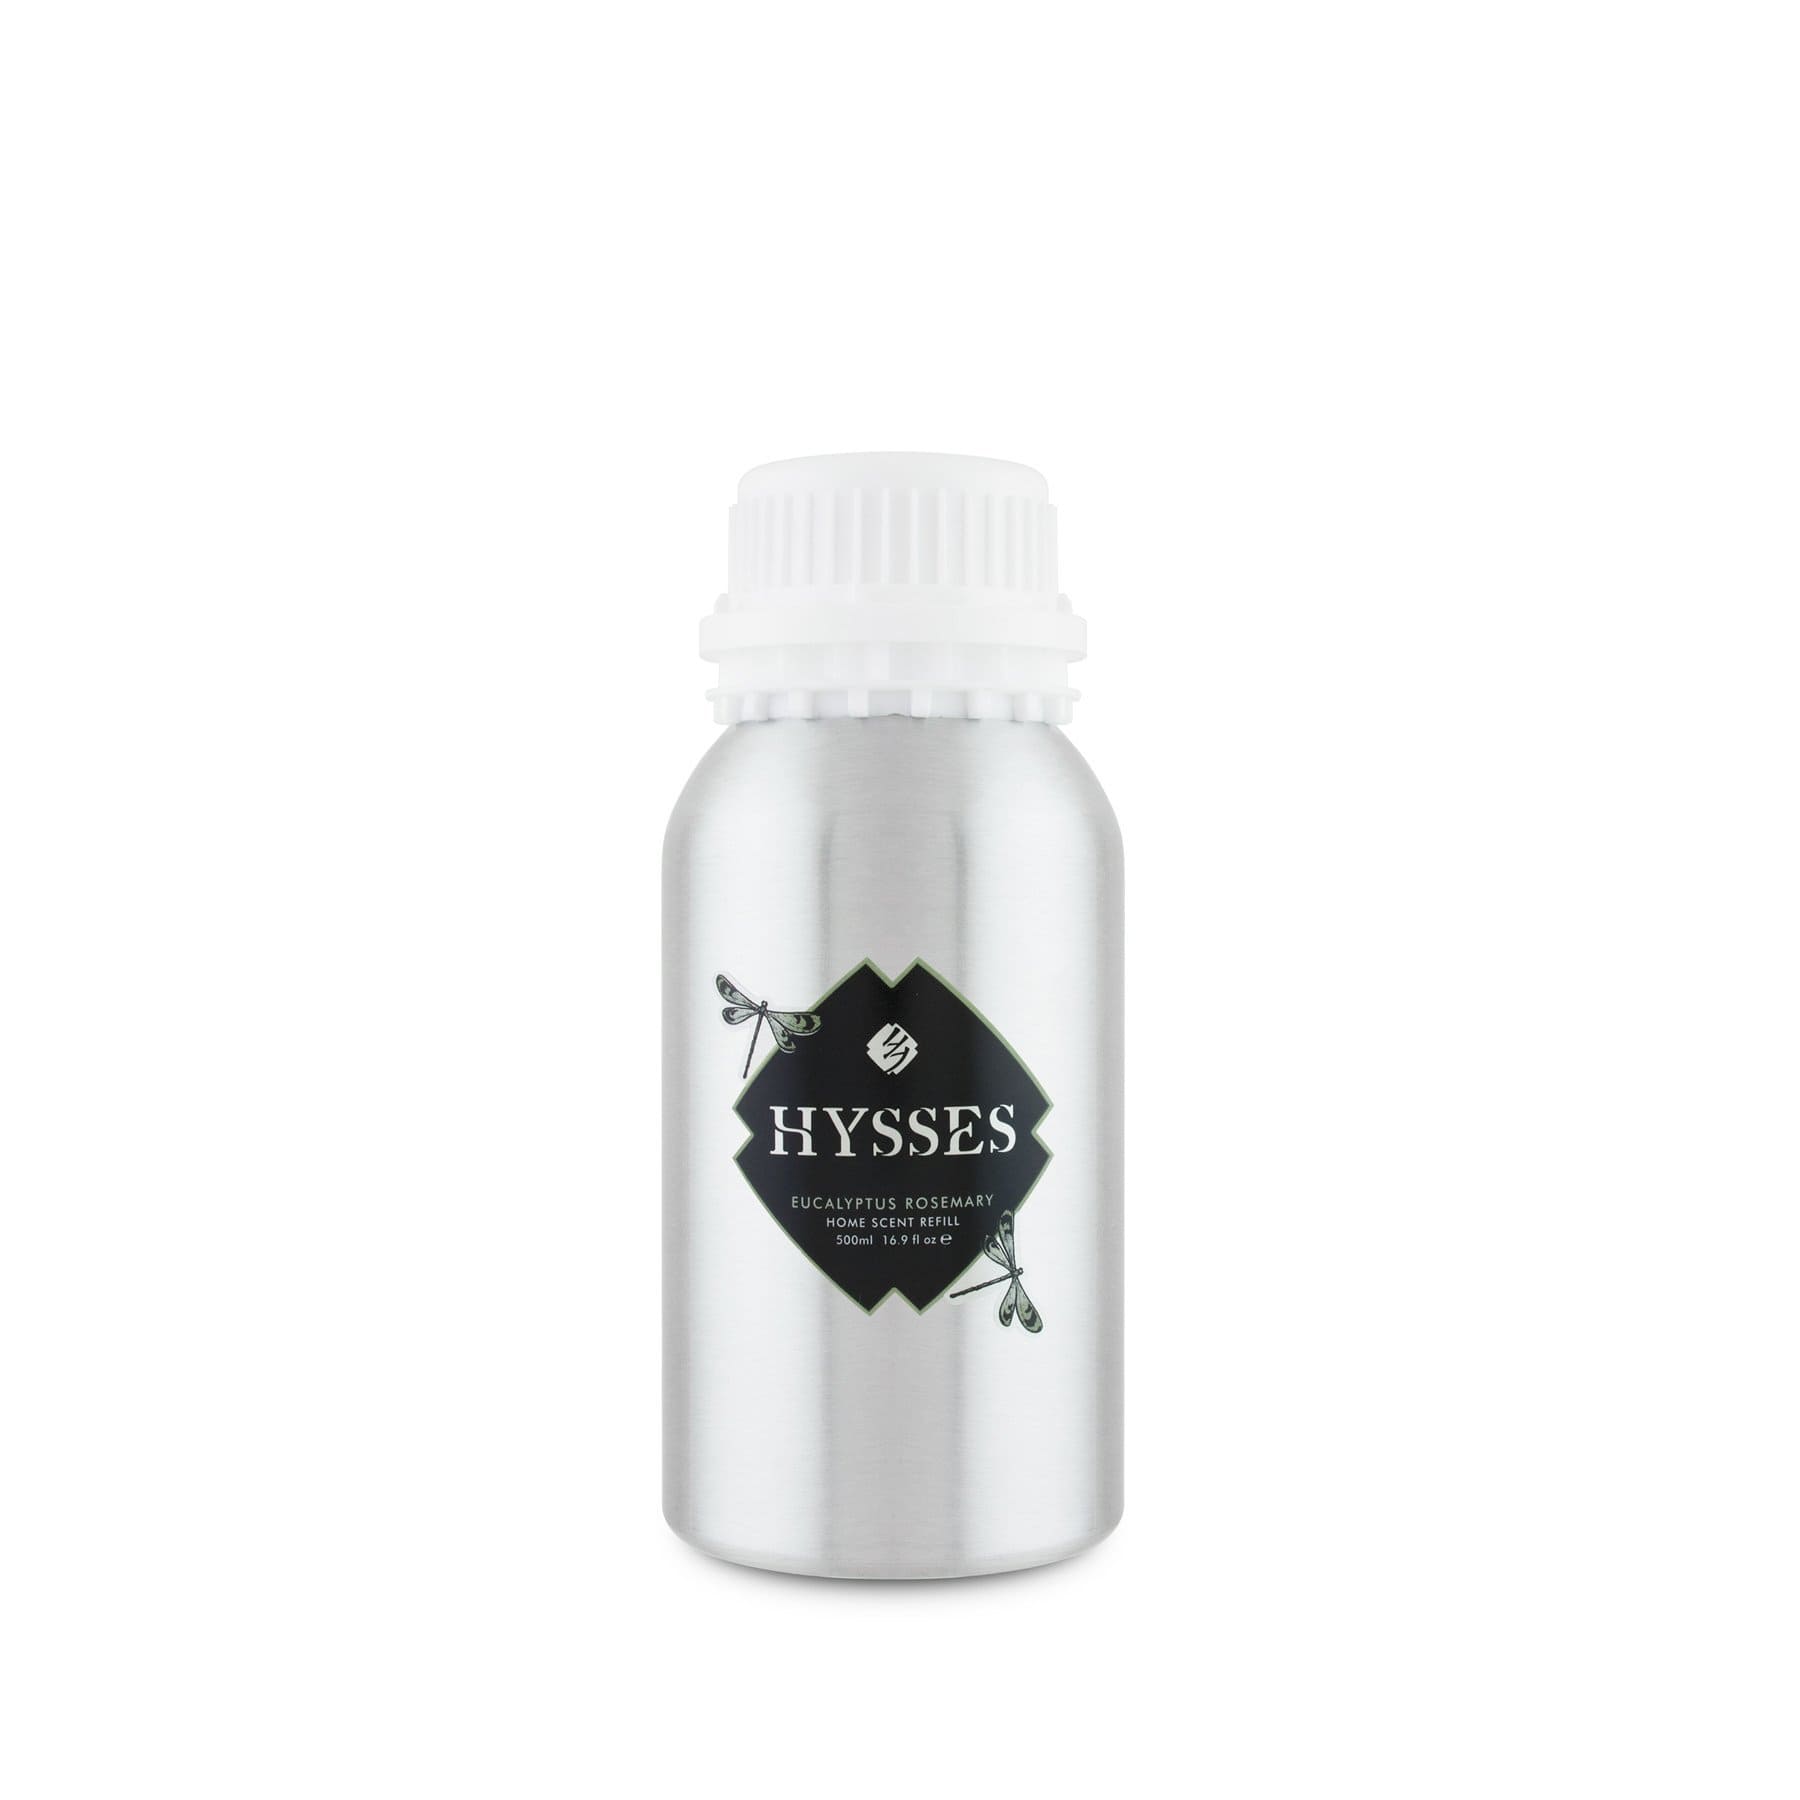 Hysses Home Scents 500ml Refill Home Scent Eucalyptus Rosemary